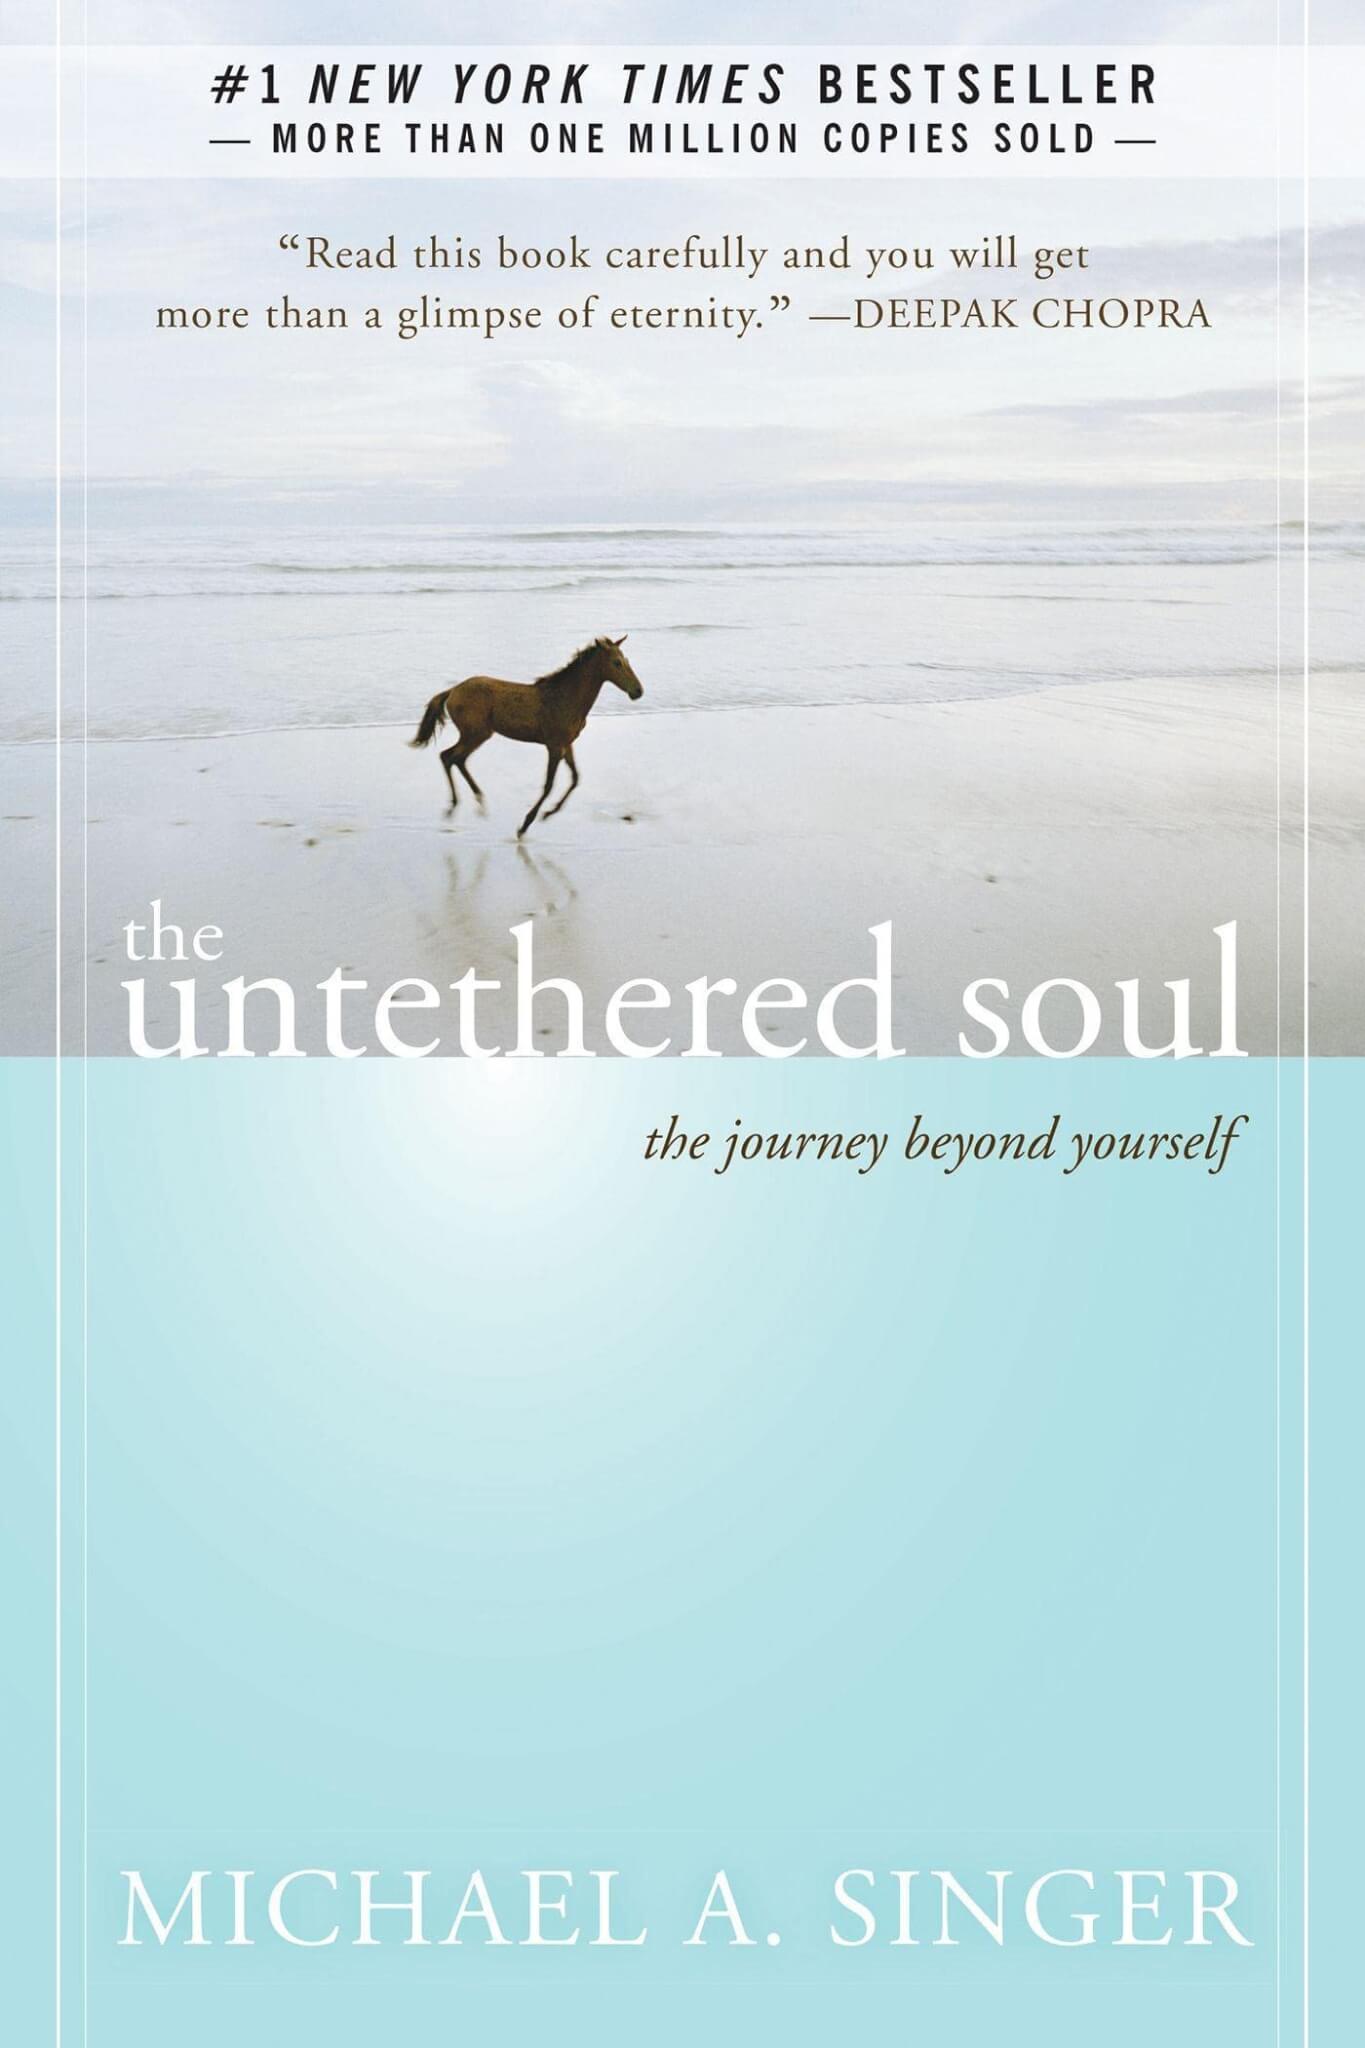 "Untethered Soul" by Michael A. Singer